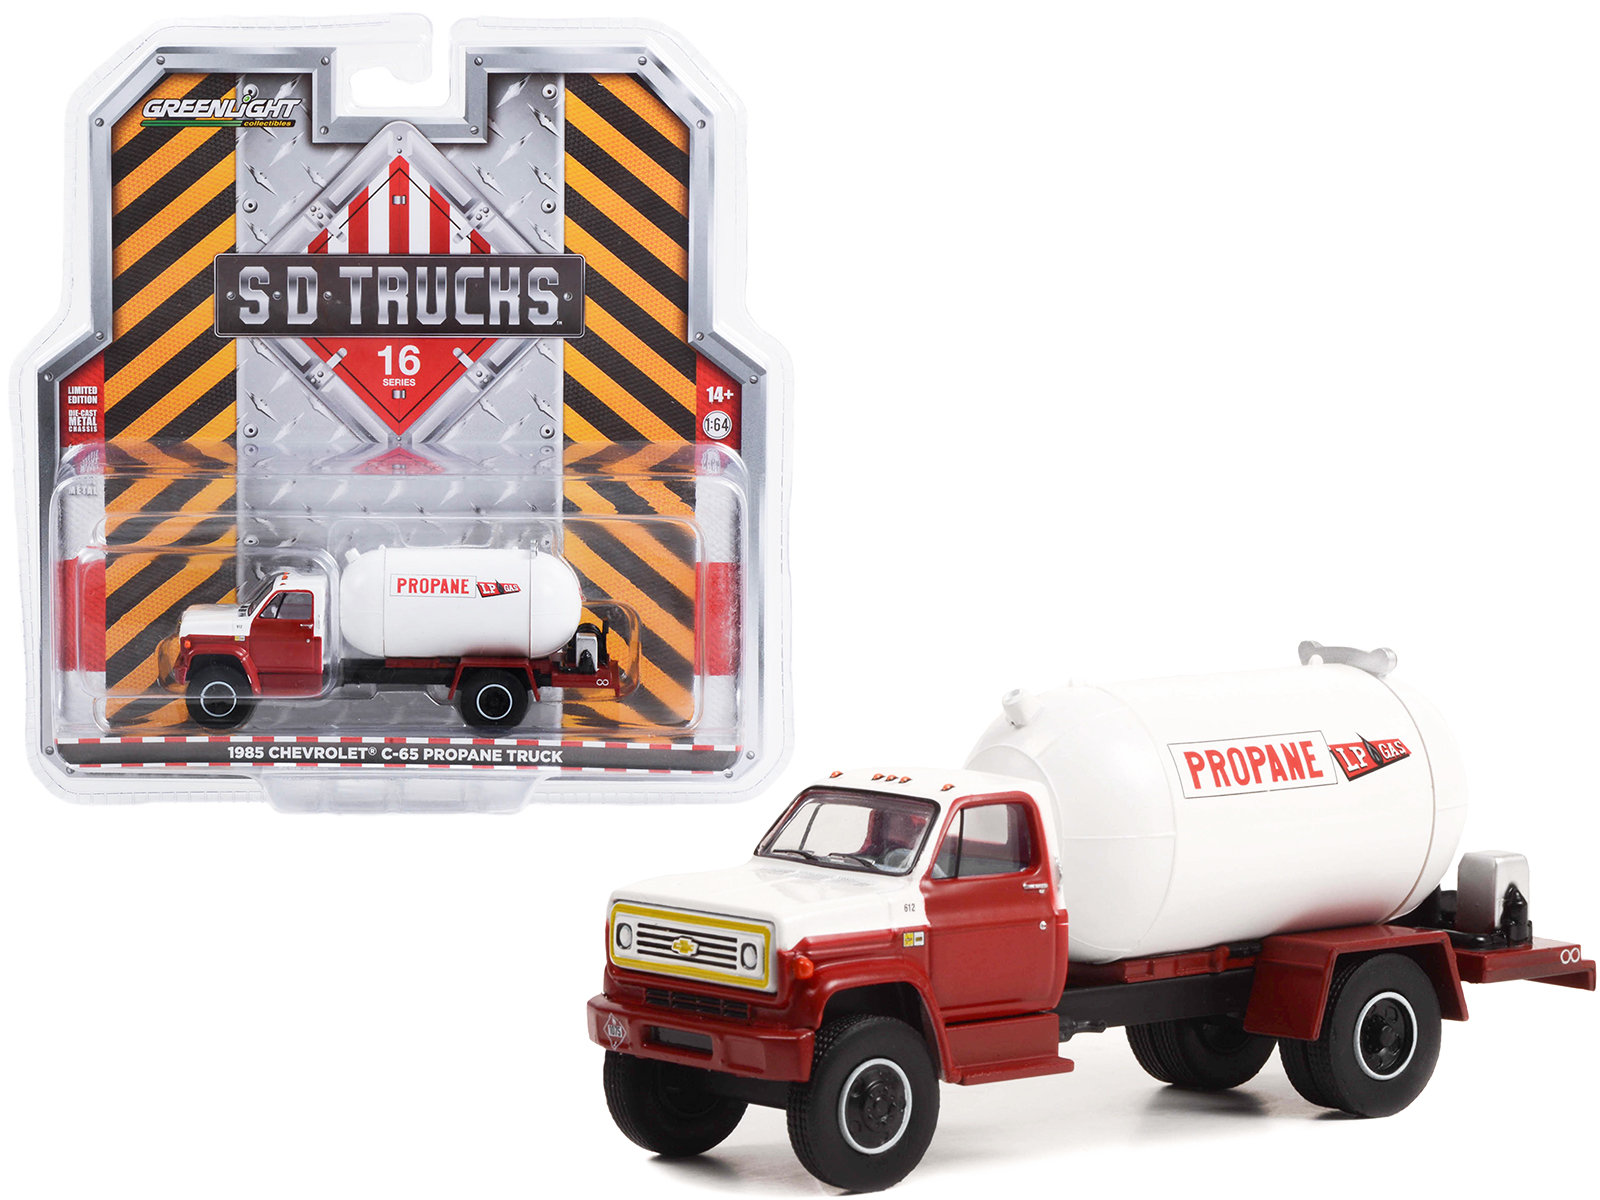 GreenLight 1985 Chevrolet C-65 Propane Truck Red and White "LP Gas" "S.D. Trucks" Series 16 1/64 Diecast Model Car by Greenlight